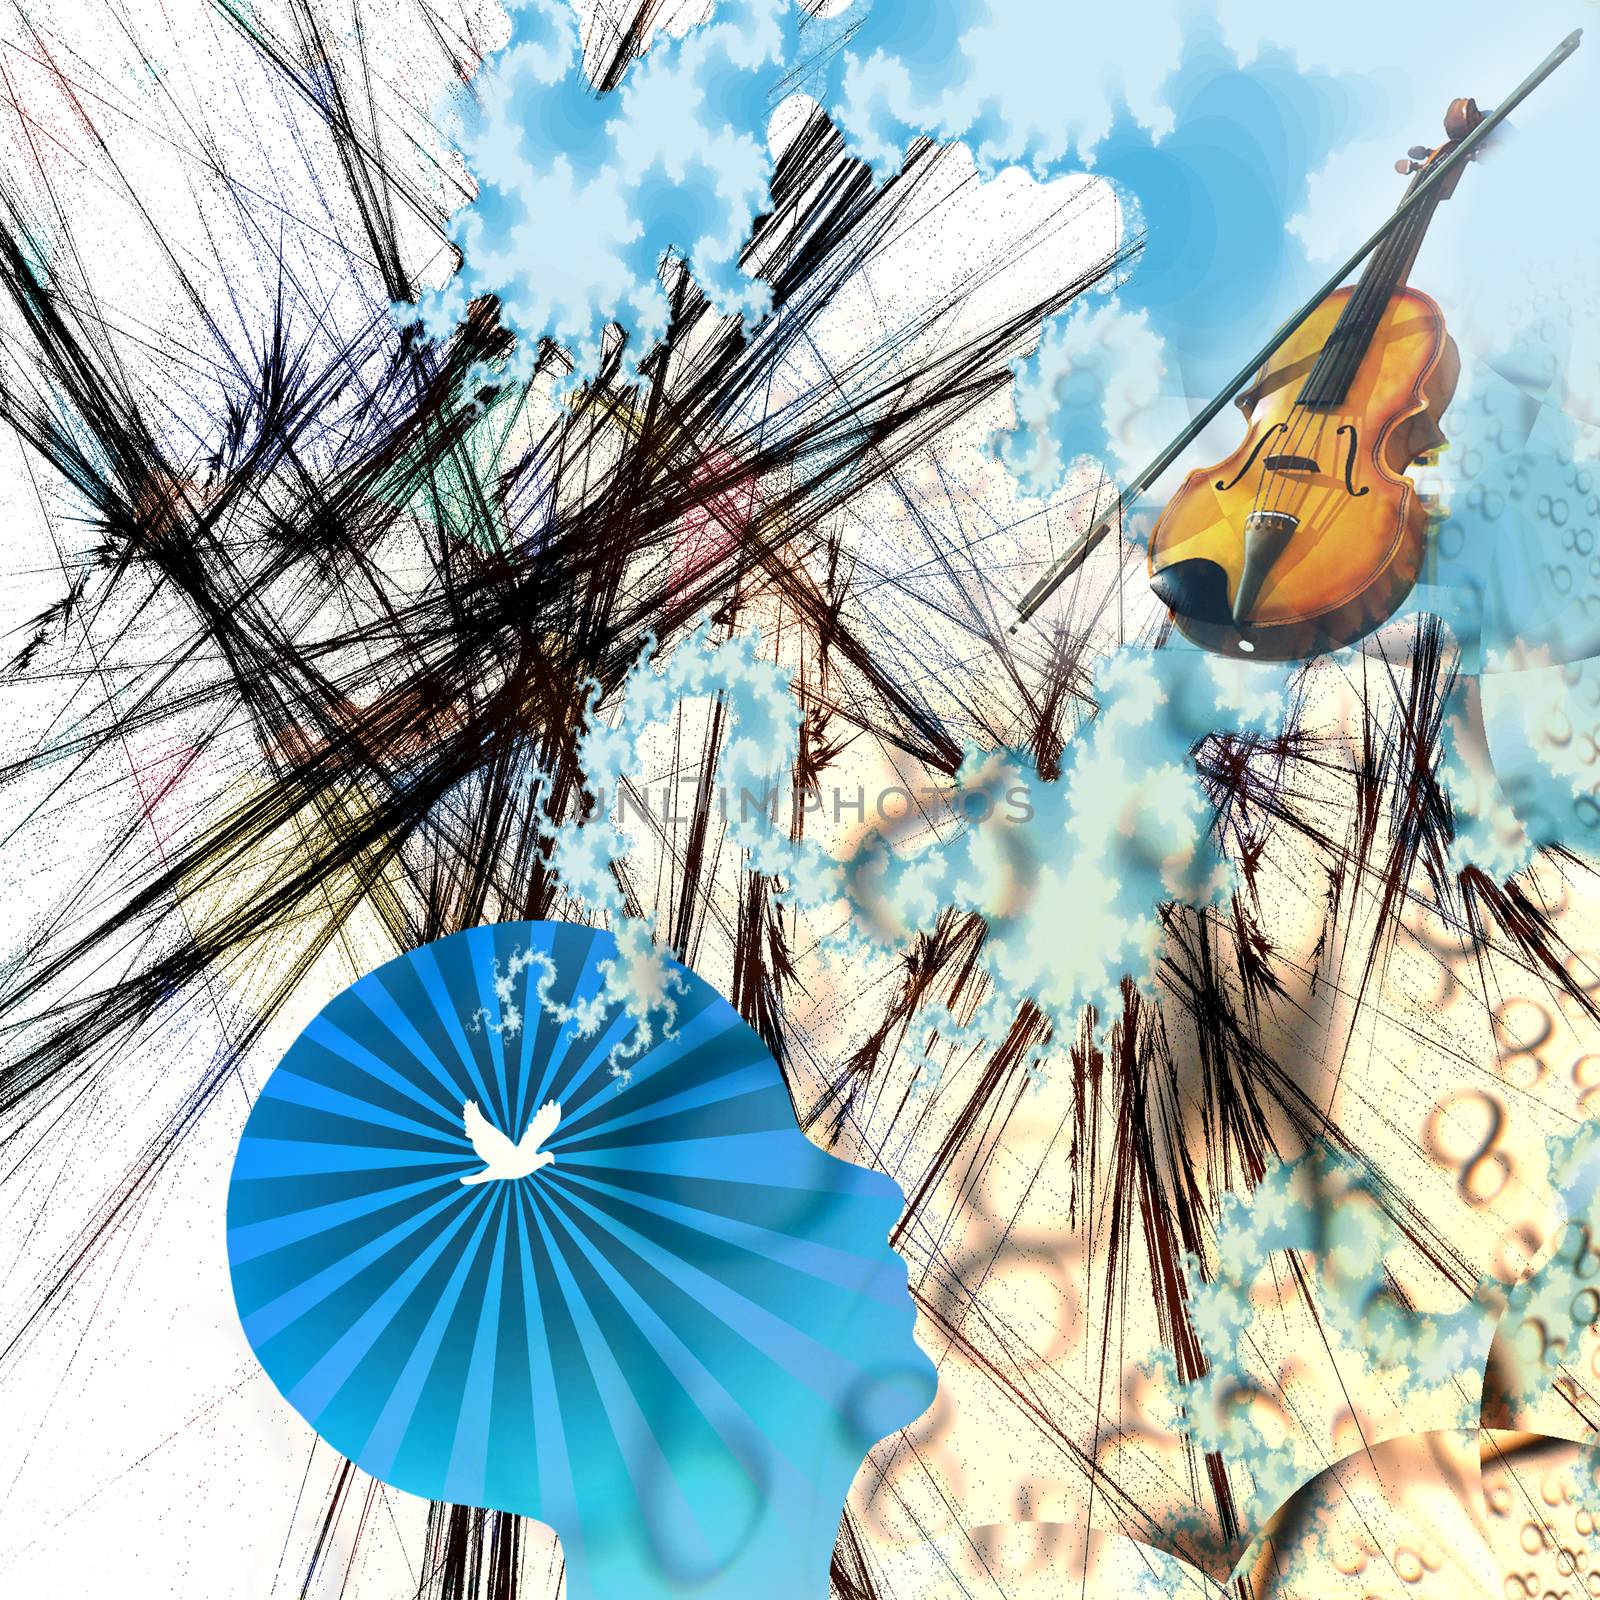 Abstract composition. Violin abd bow in the sky. Silhouette of human head with bird inside